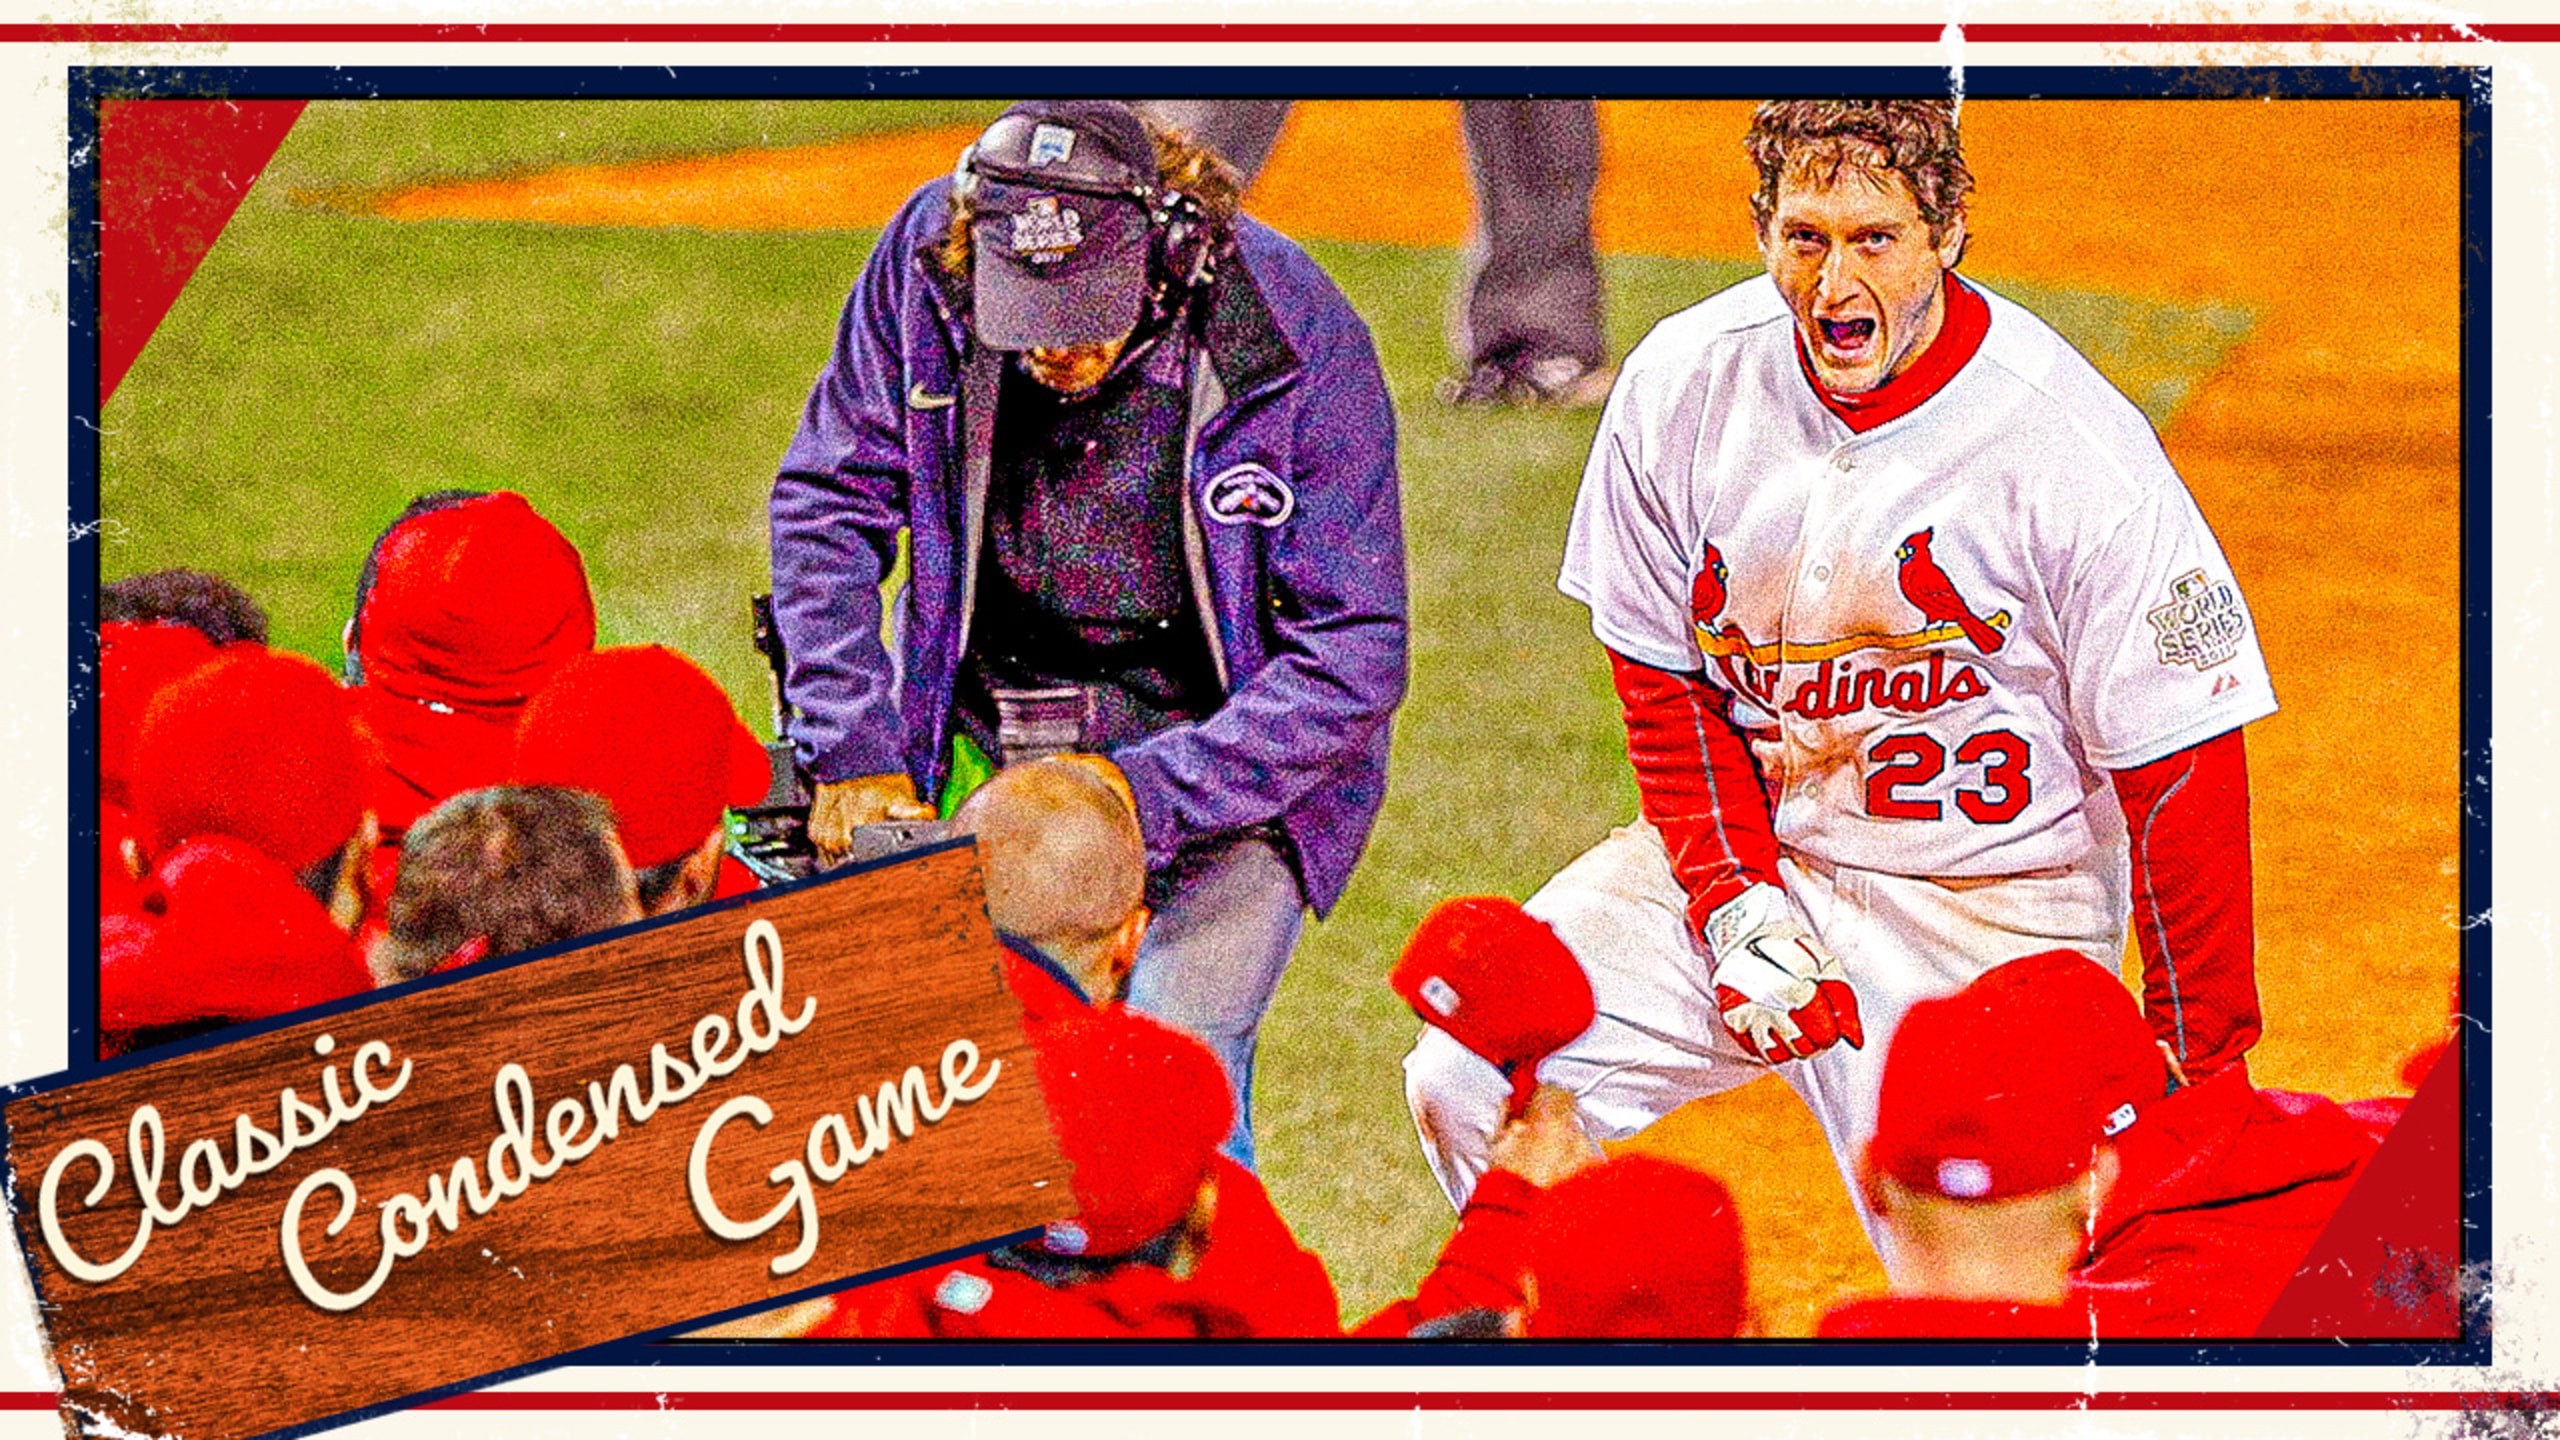 Three non-David Freese moments that made the Cardinals' unexpected 2011  World Series championship possible